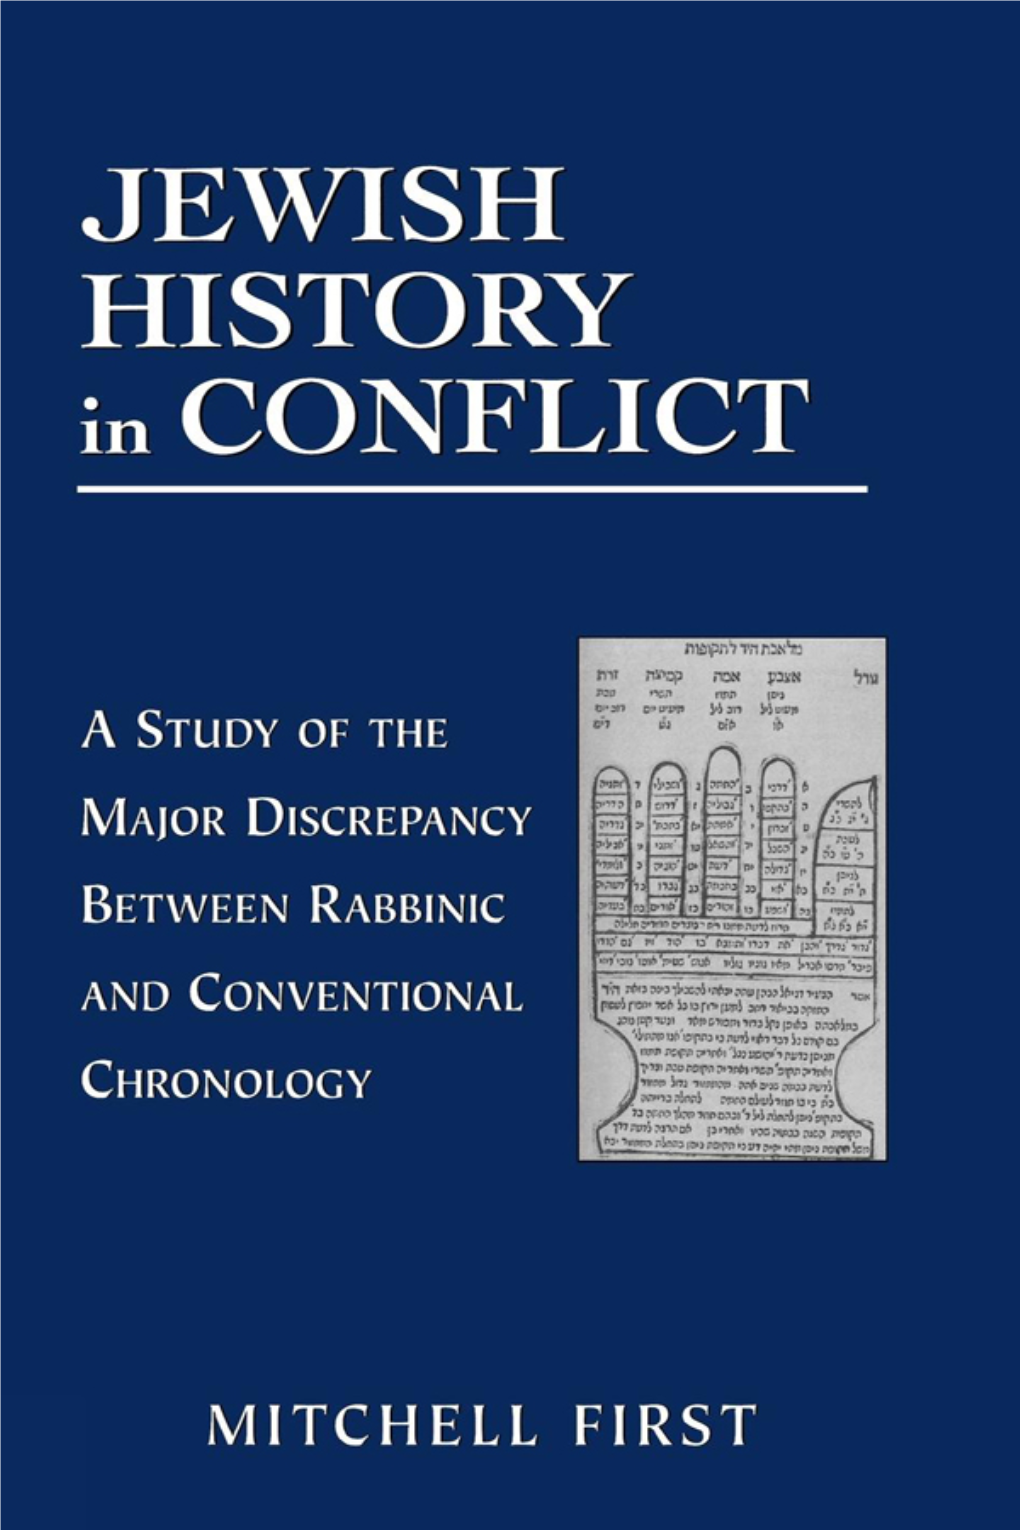 JEWISH HISTORY in CONFLICT